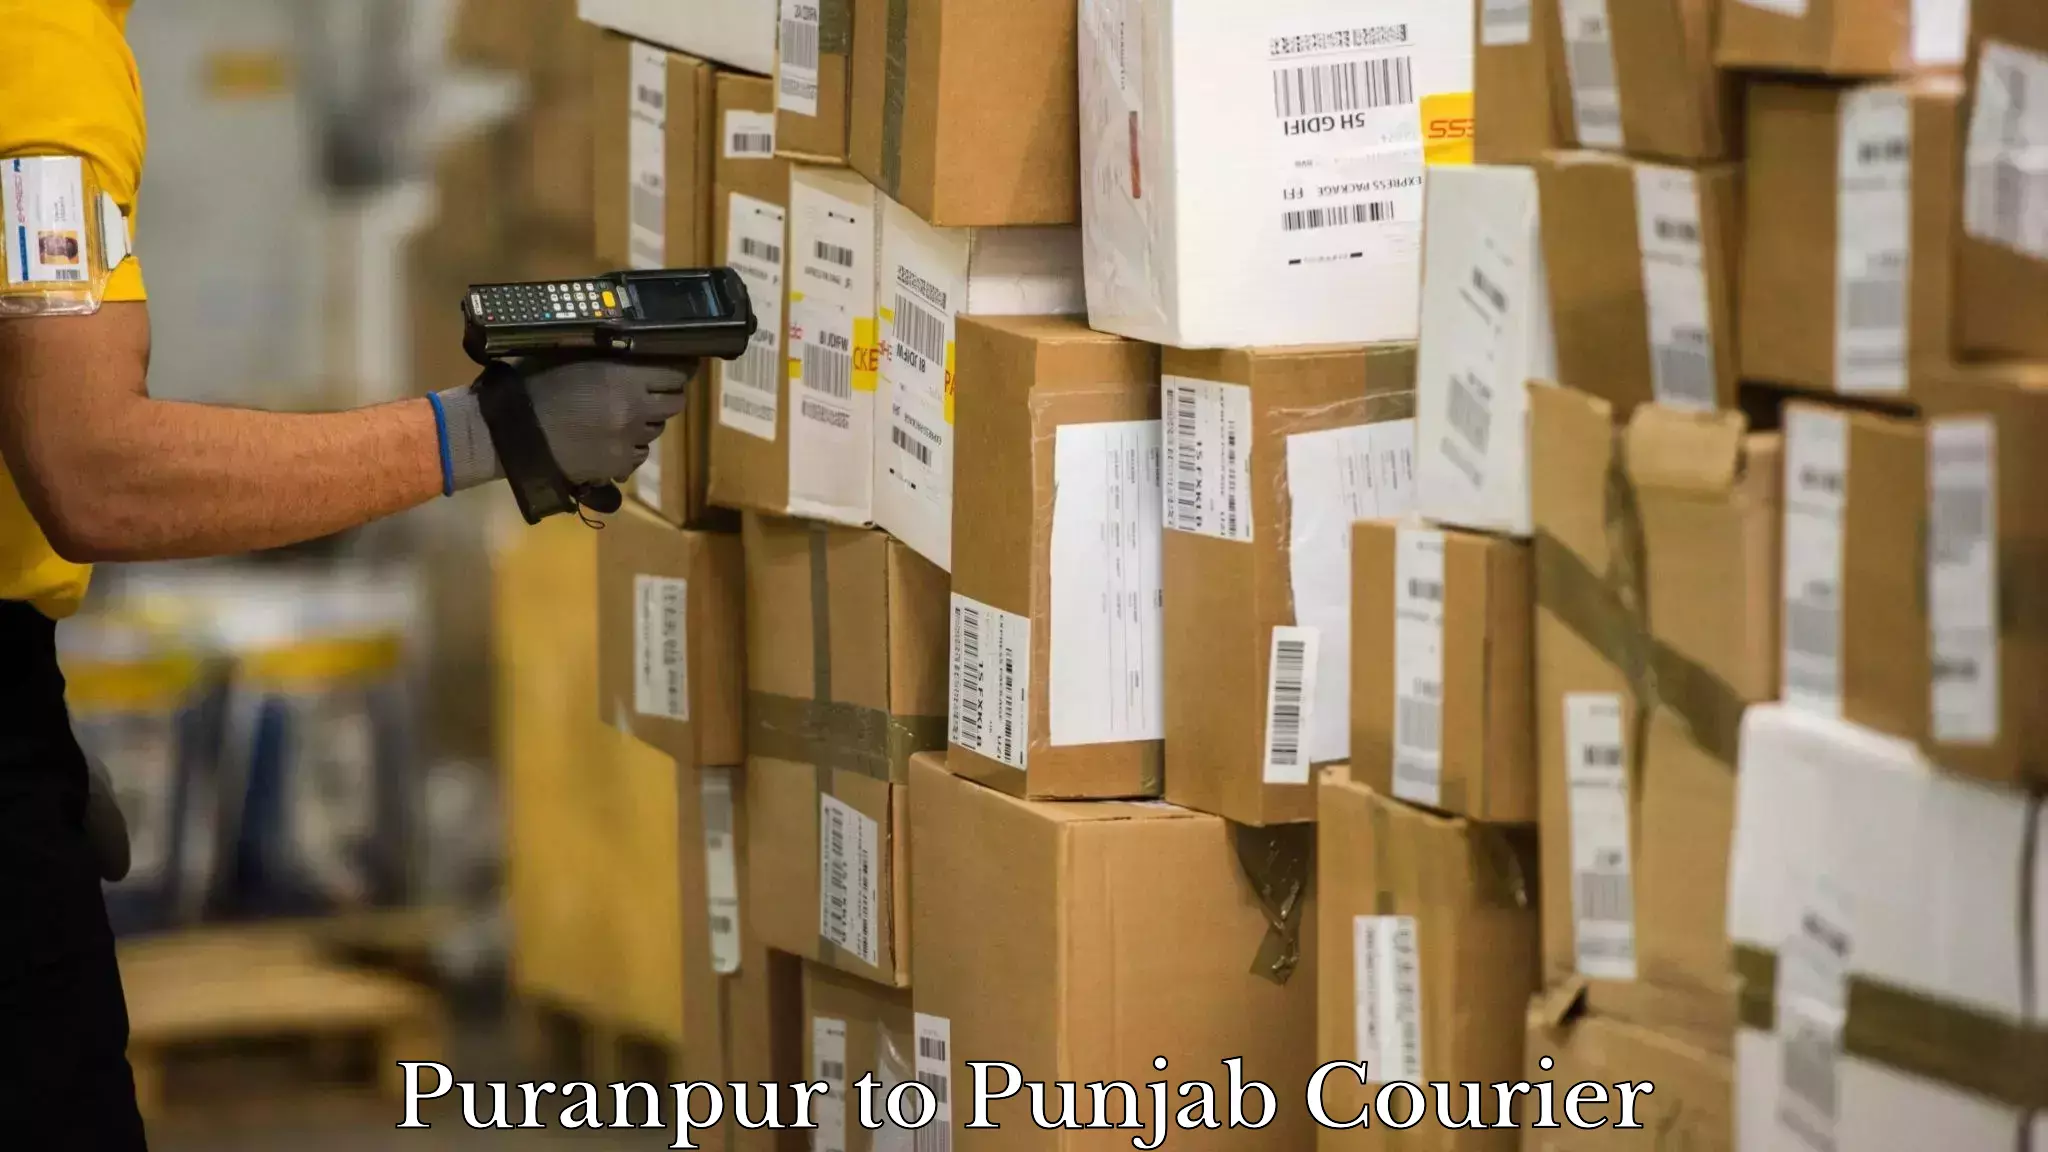 Personal courier services in Puranpur to Punjab